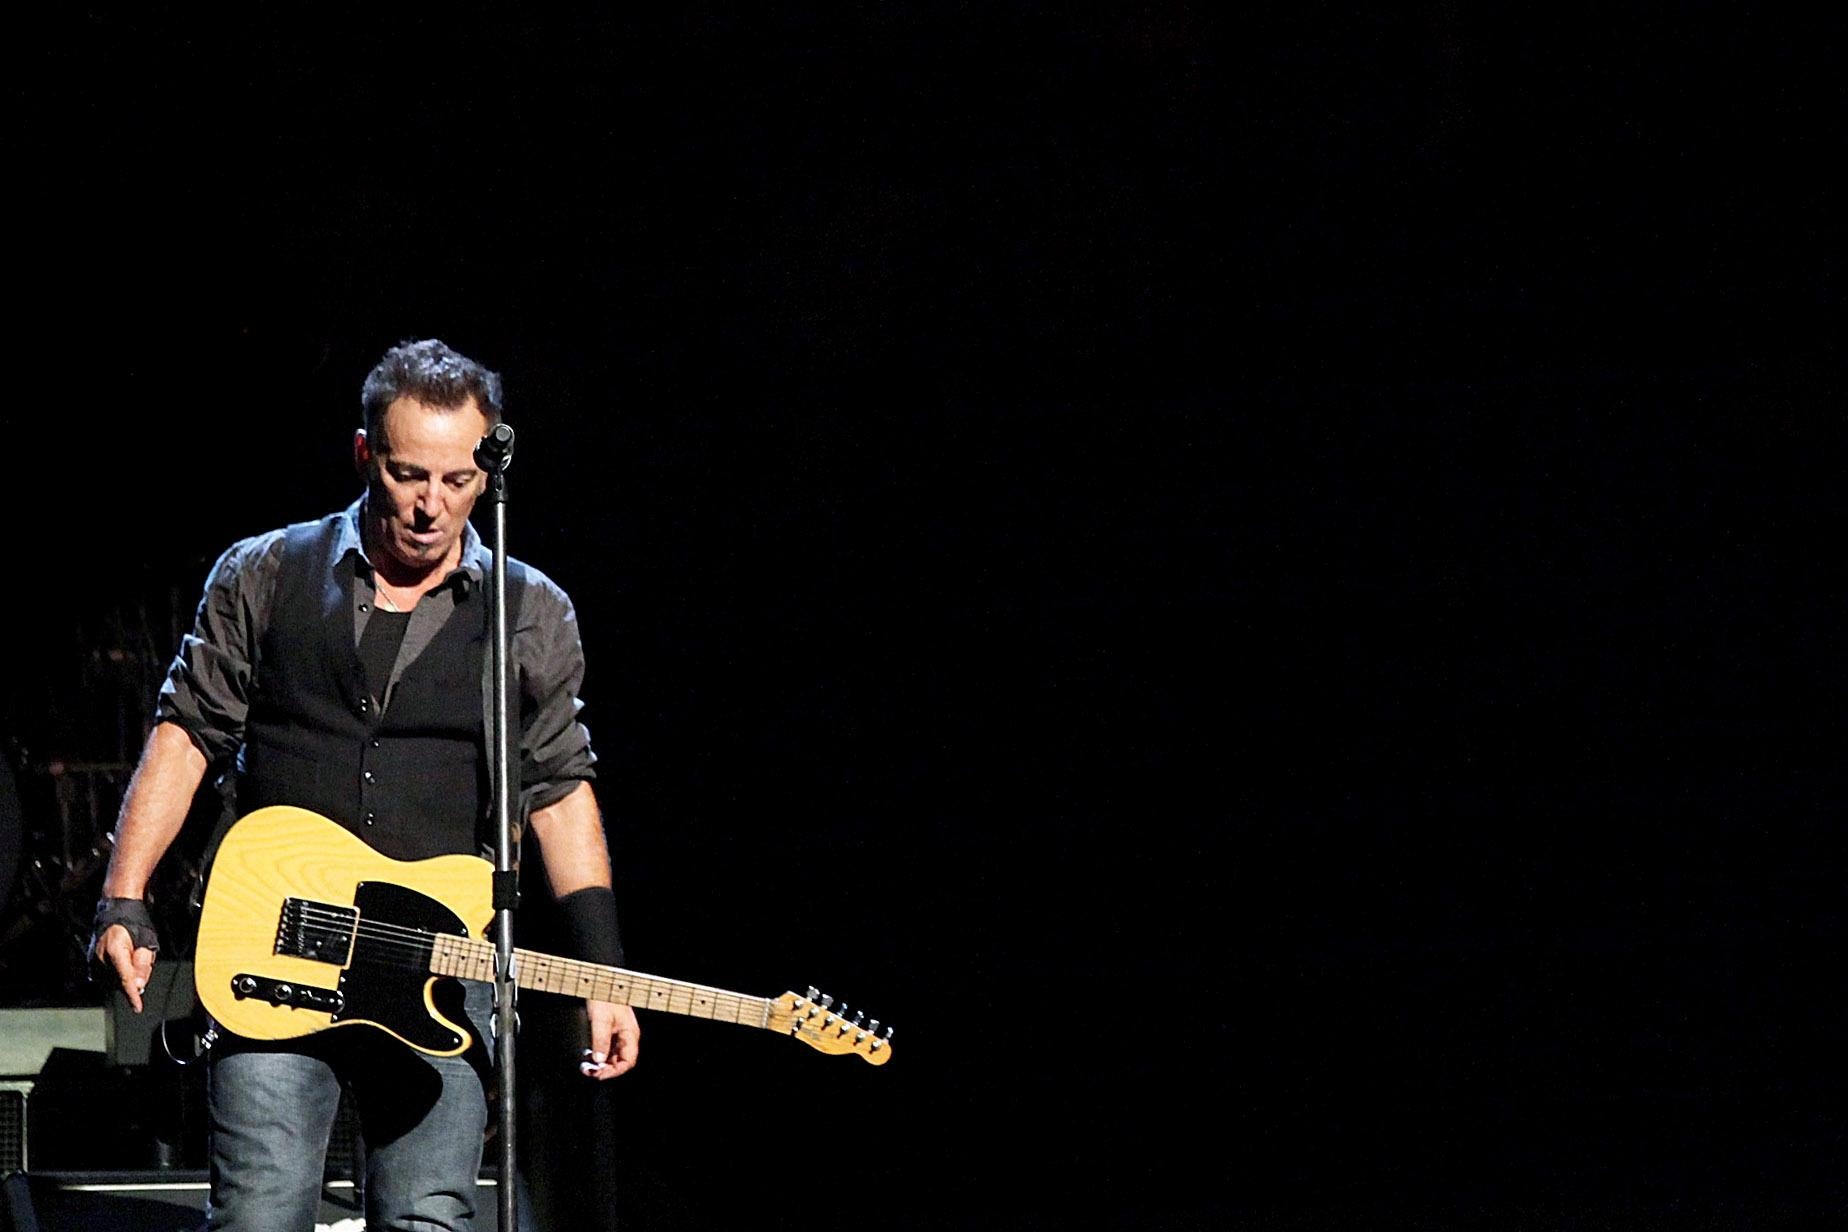 Bruce Springsteen onstage with a guitar strapped around him.